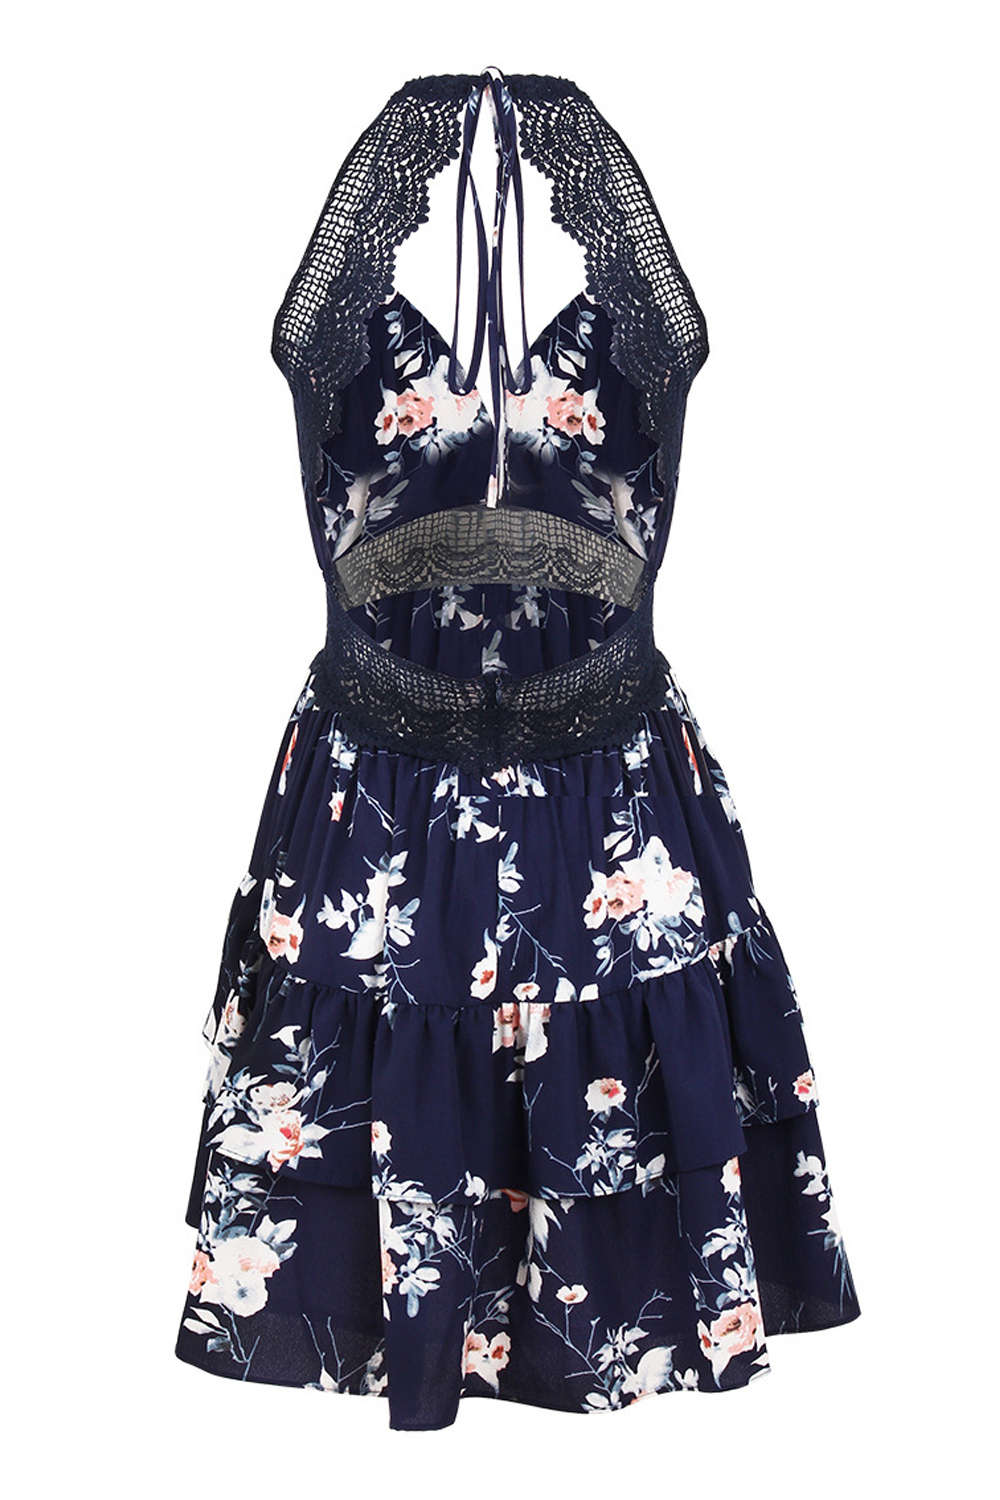 Iyasson Lace Inserts Halter Neck Floral Dress